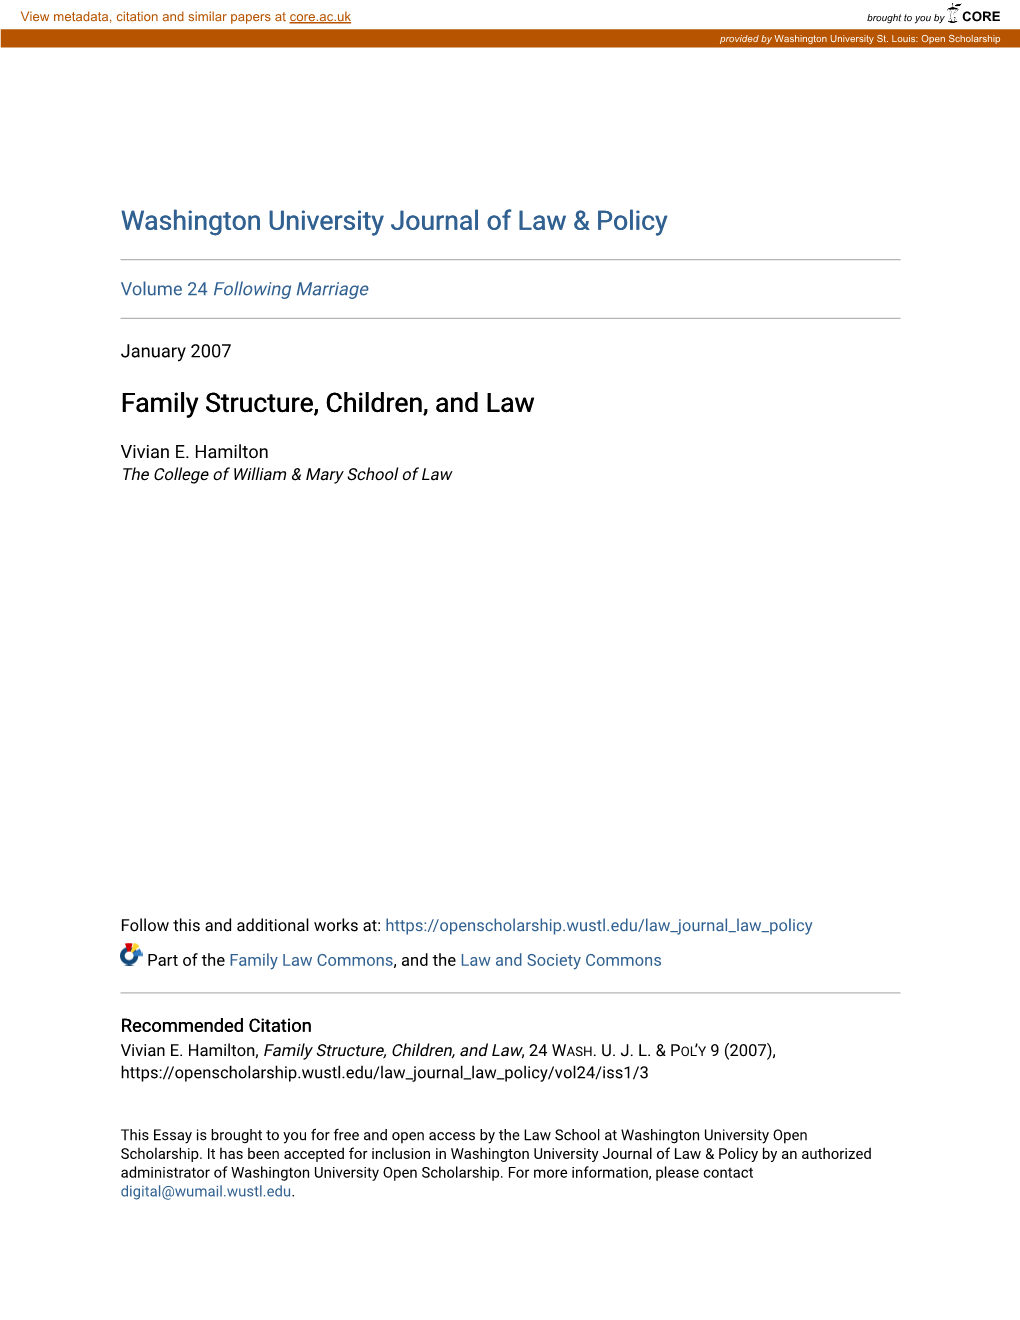 Family Structure, Children, and Law